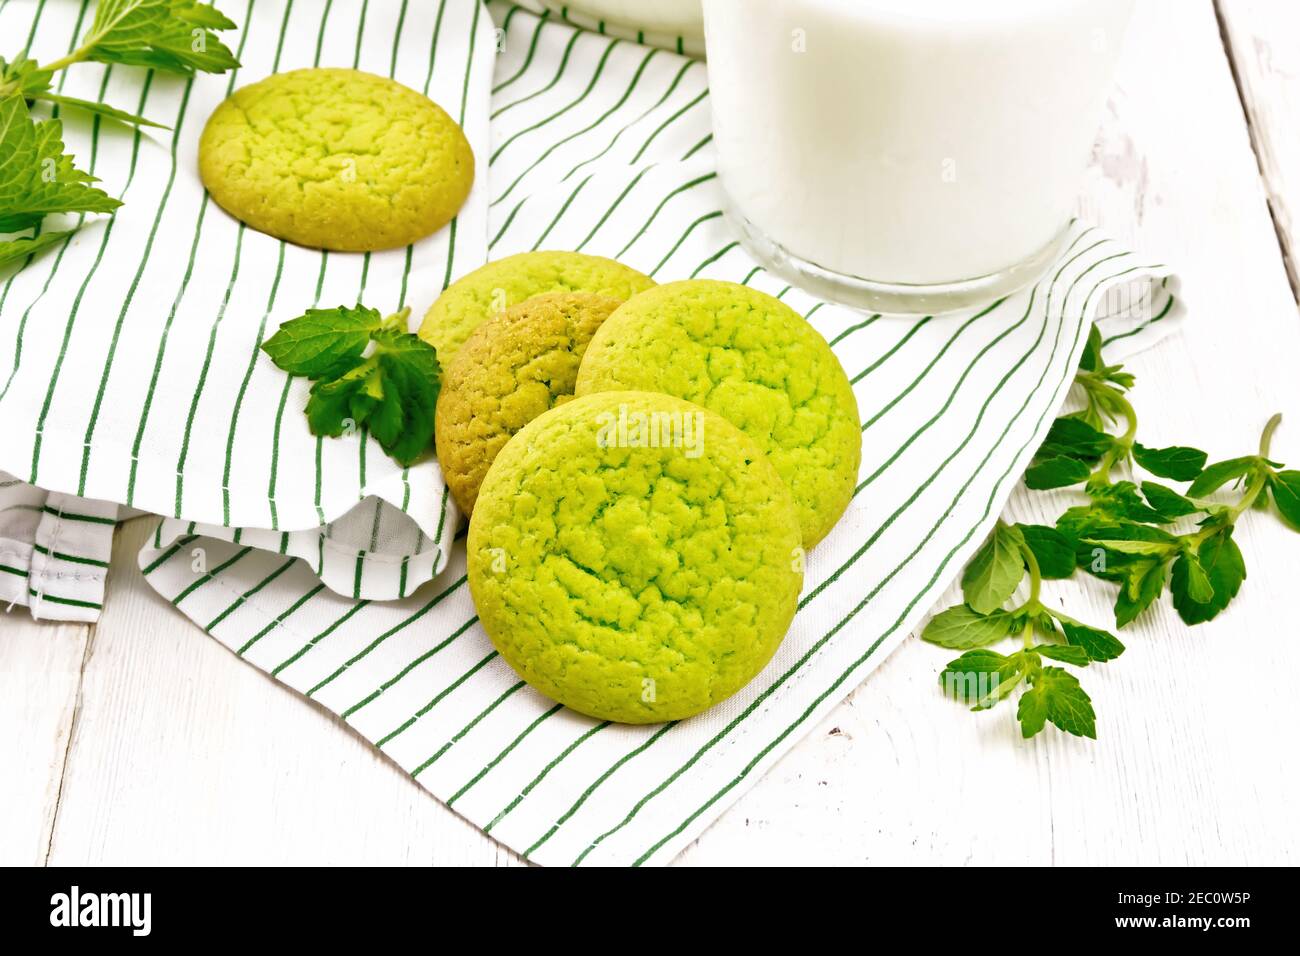 Green mint cookies on a towel with milk in a glass on wooden board background Stock Photo